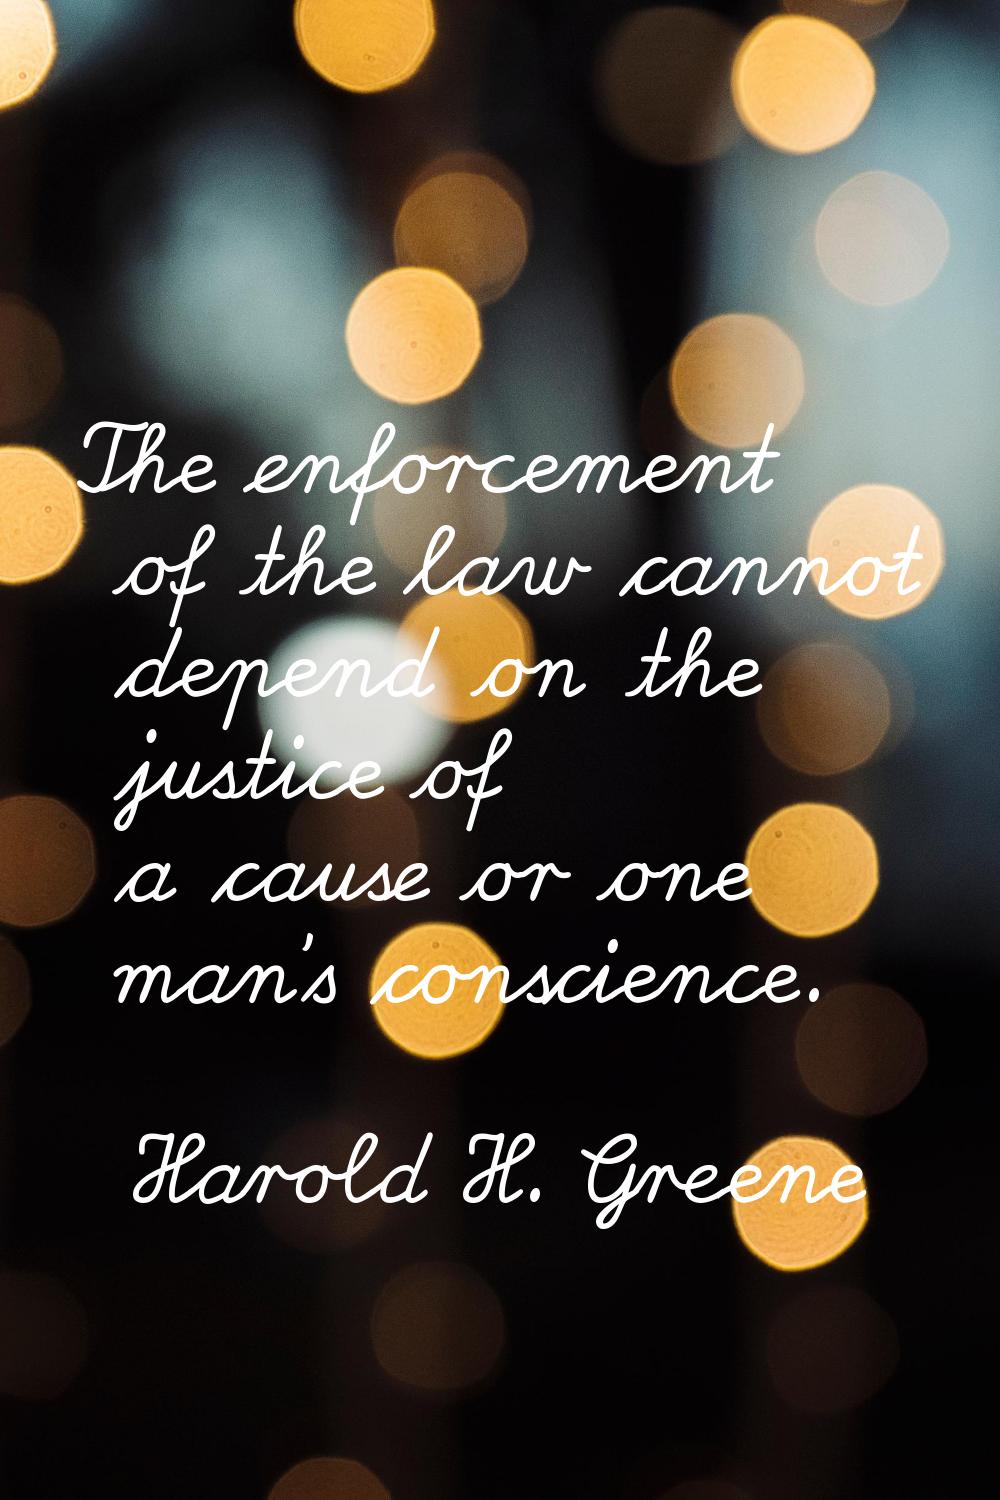 The enforcement of the law cannot depend on the justice of a cause or one man's conscience.